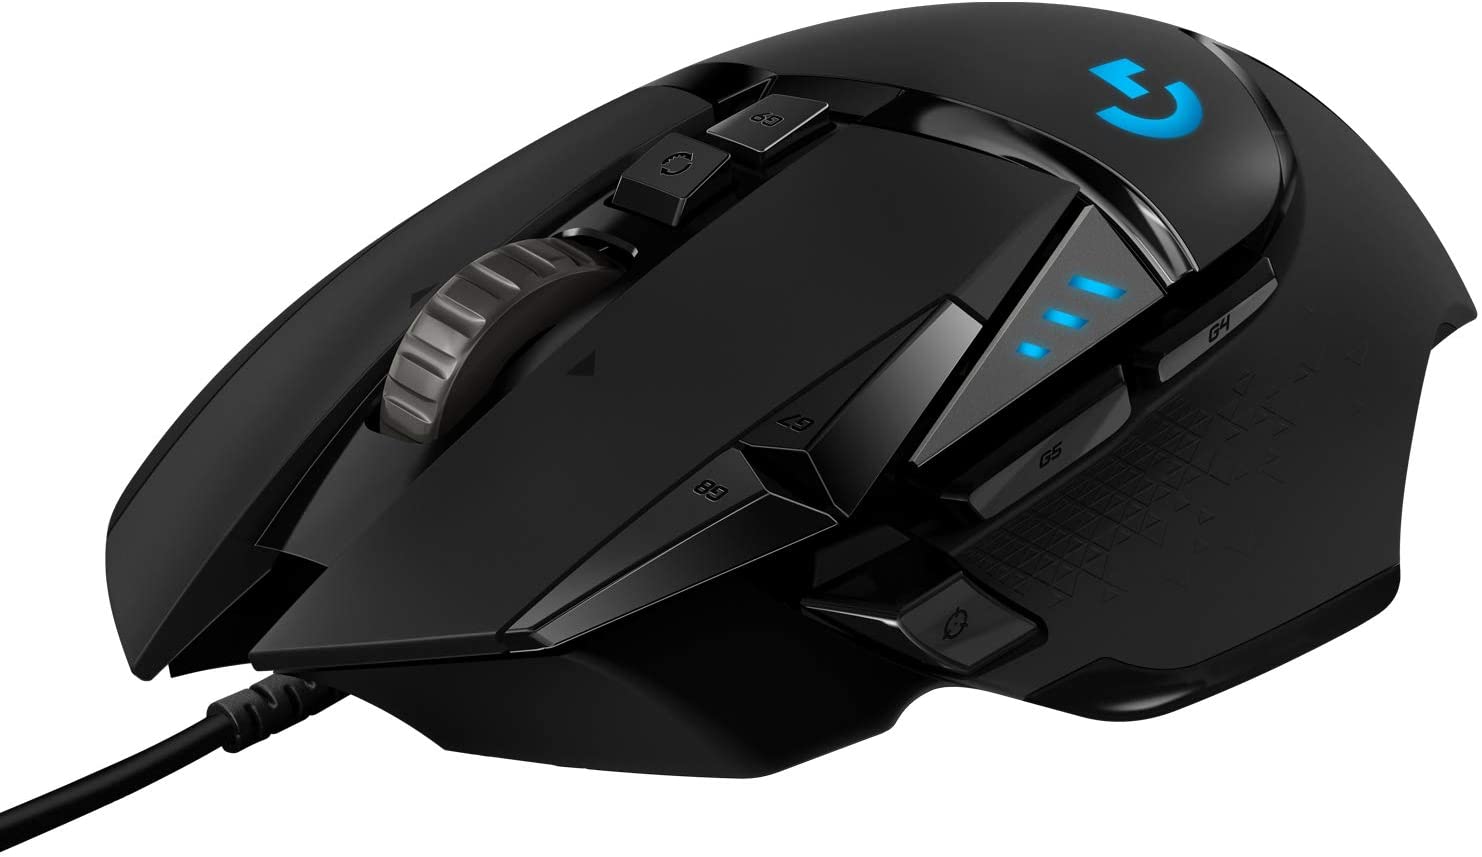 Logitech G502 HERO Wired Gaming Mouse w/ RGB Lighting $35 + Free Shipping